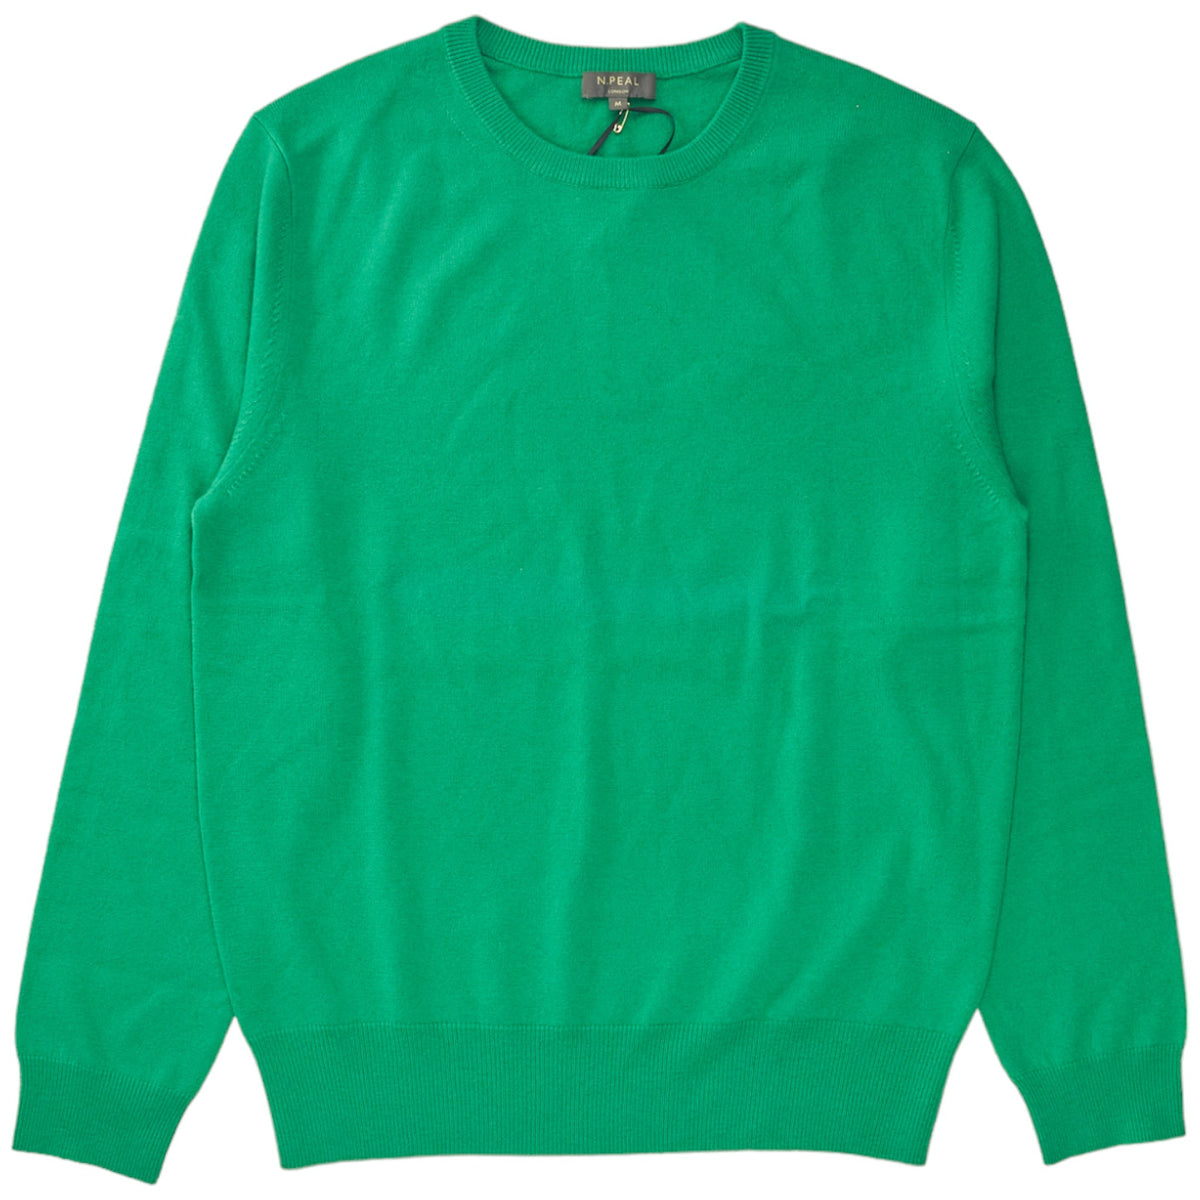 N. Peal Spring Green Cashmere Sweater